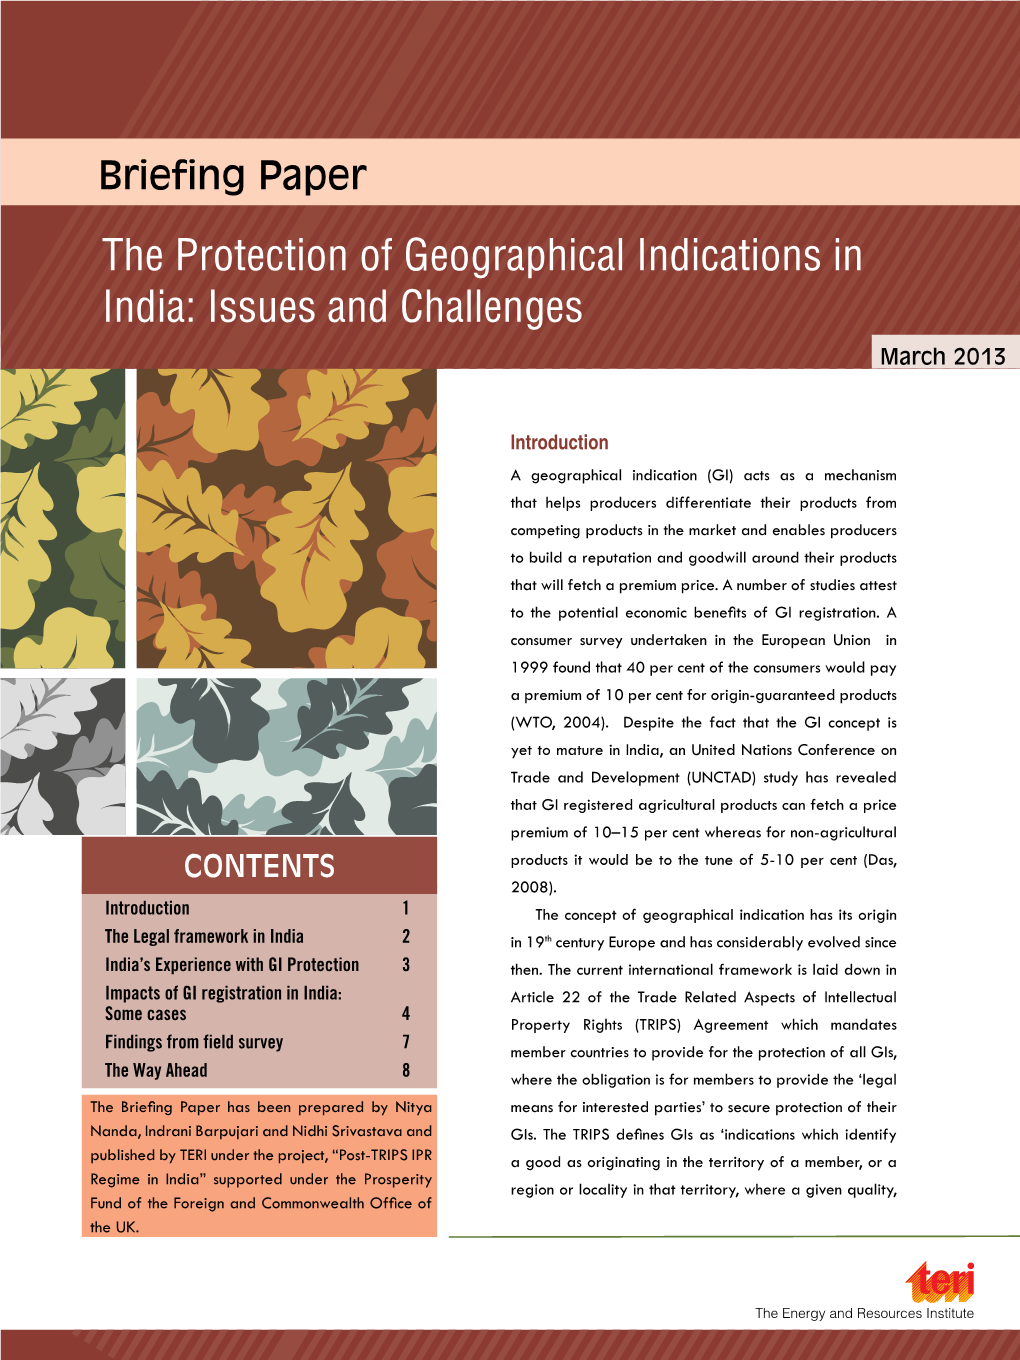 The Protection of Geographical Indications in India: Issues and Challenges March 2013